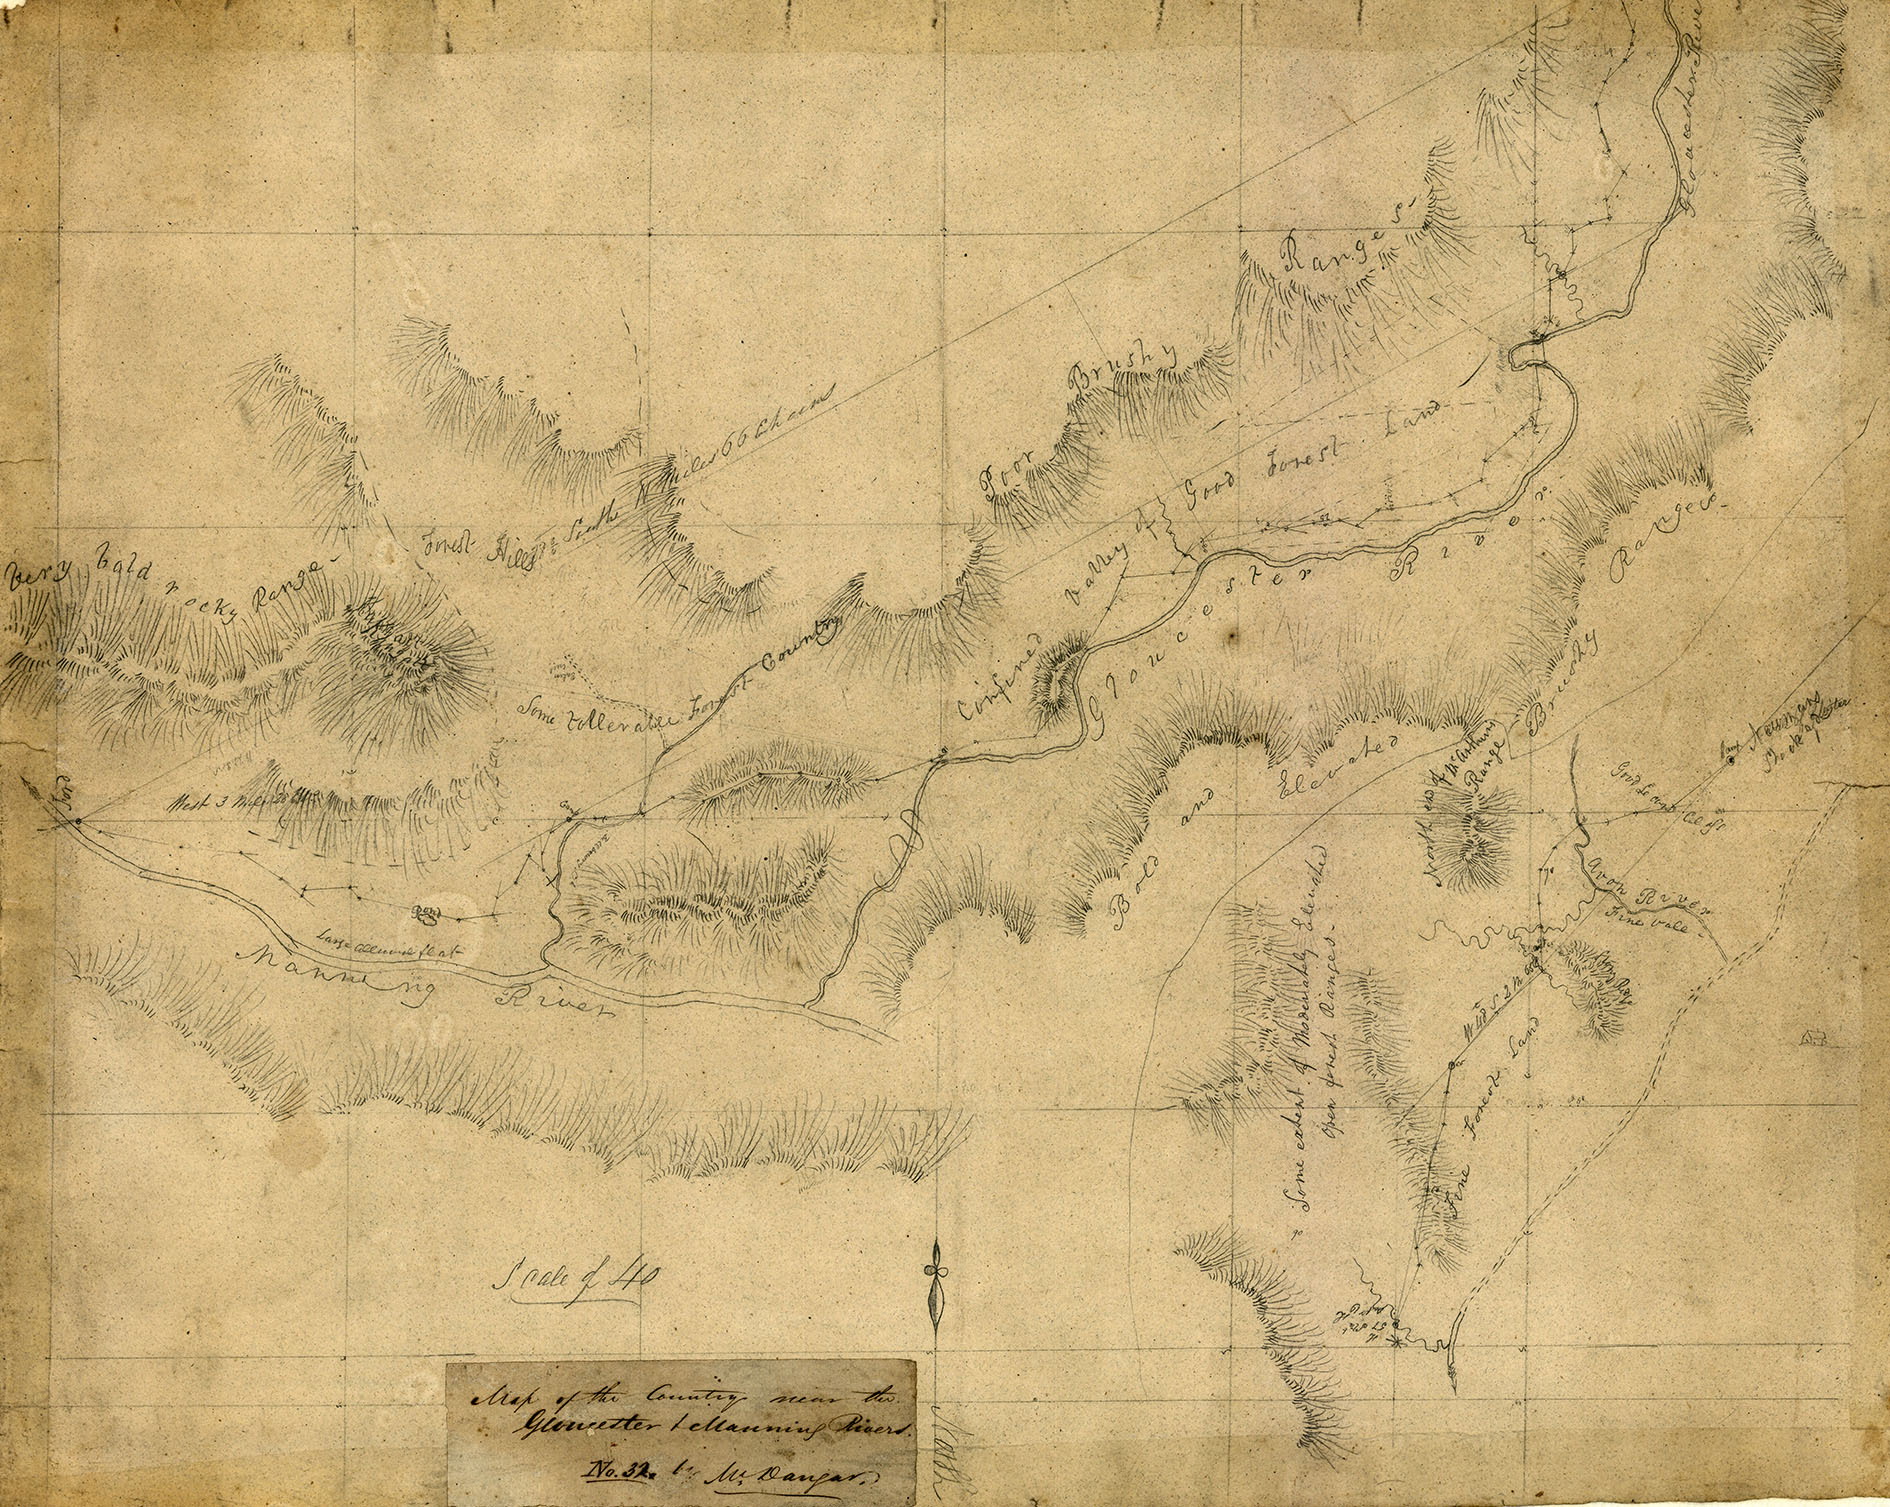 Map drawn by surveyor Henry Dangar of the country near the Gloucester and Manning Rivers, Port Stephens Estate, New South Wales, 1829 (A69). 